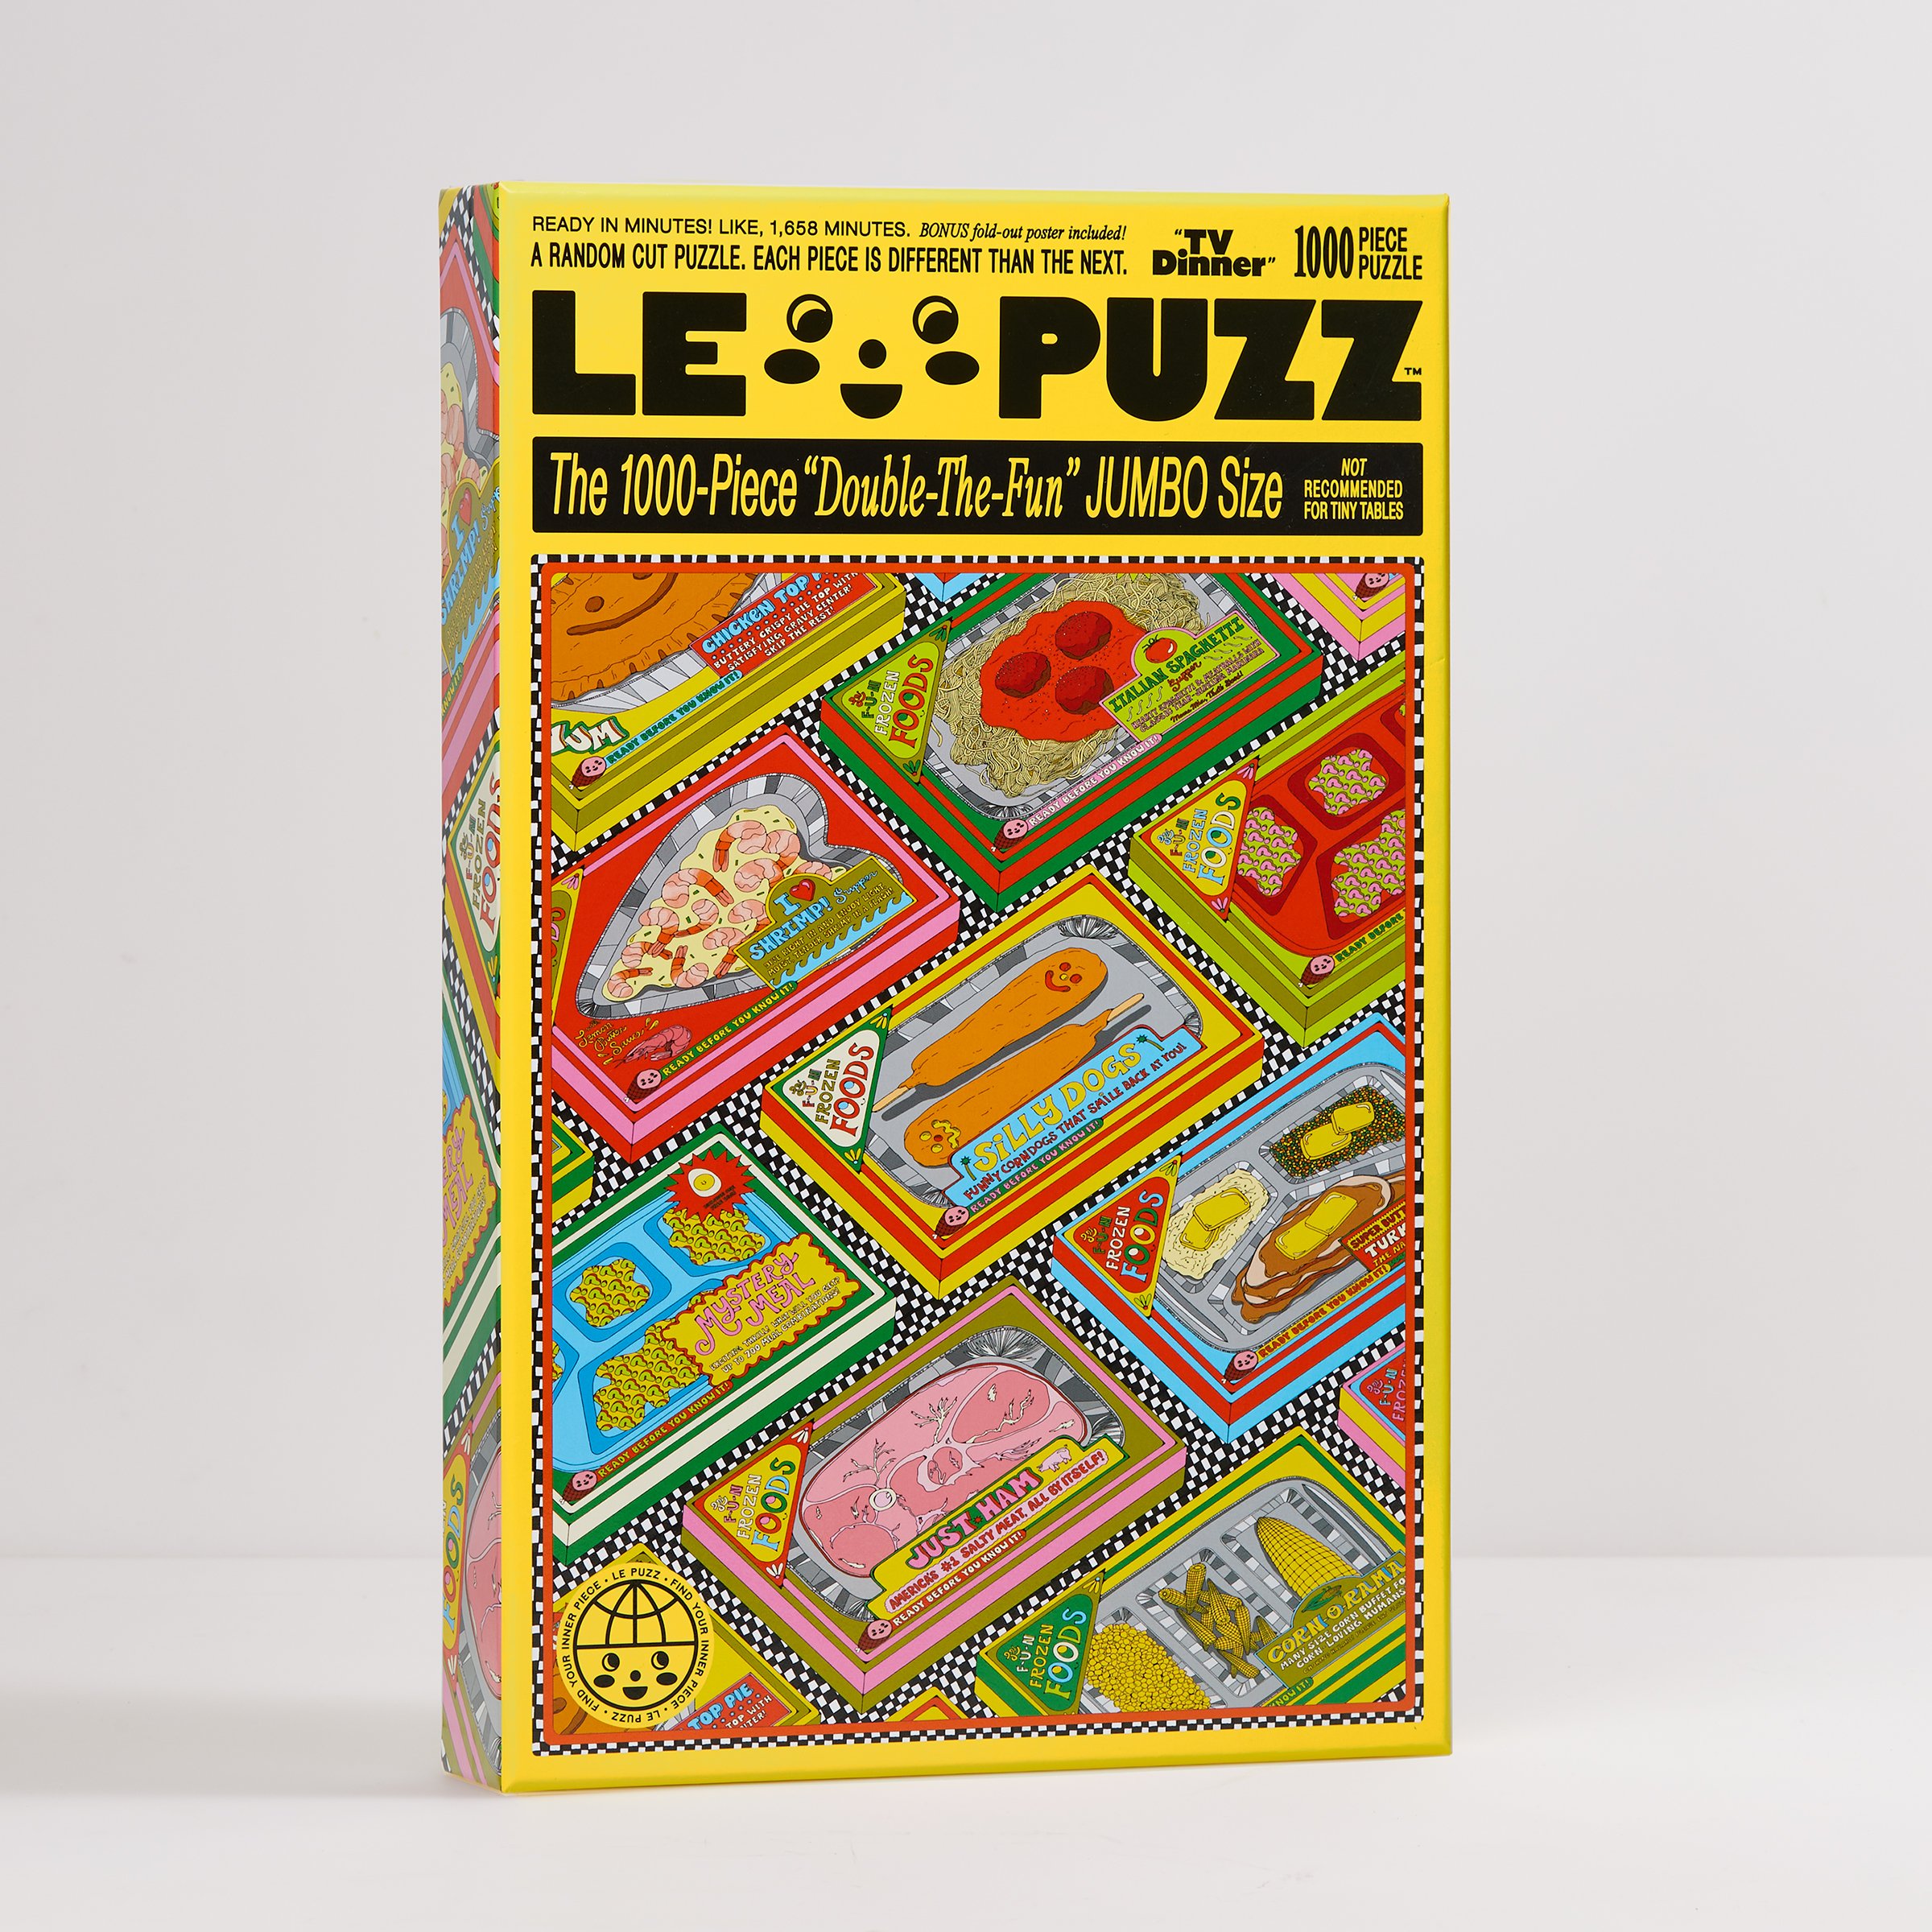 Le Puzz "TV Dinner"